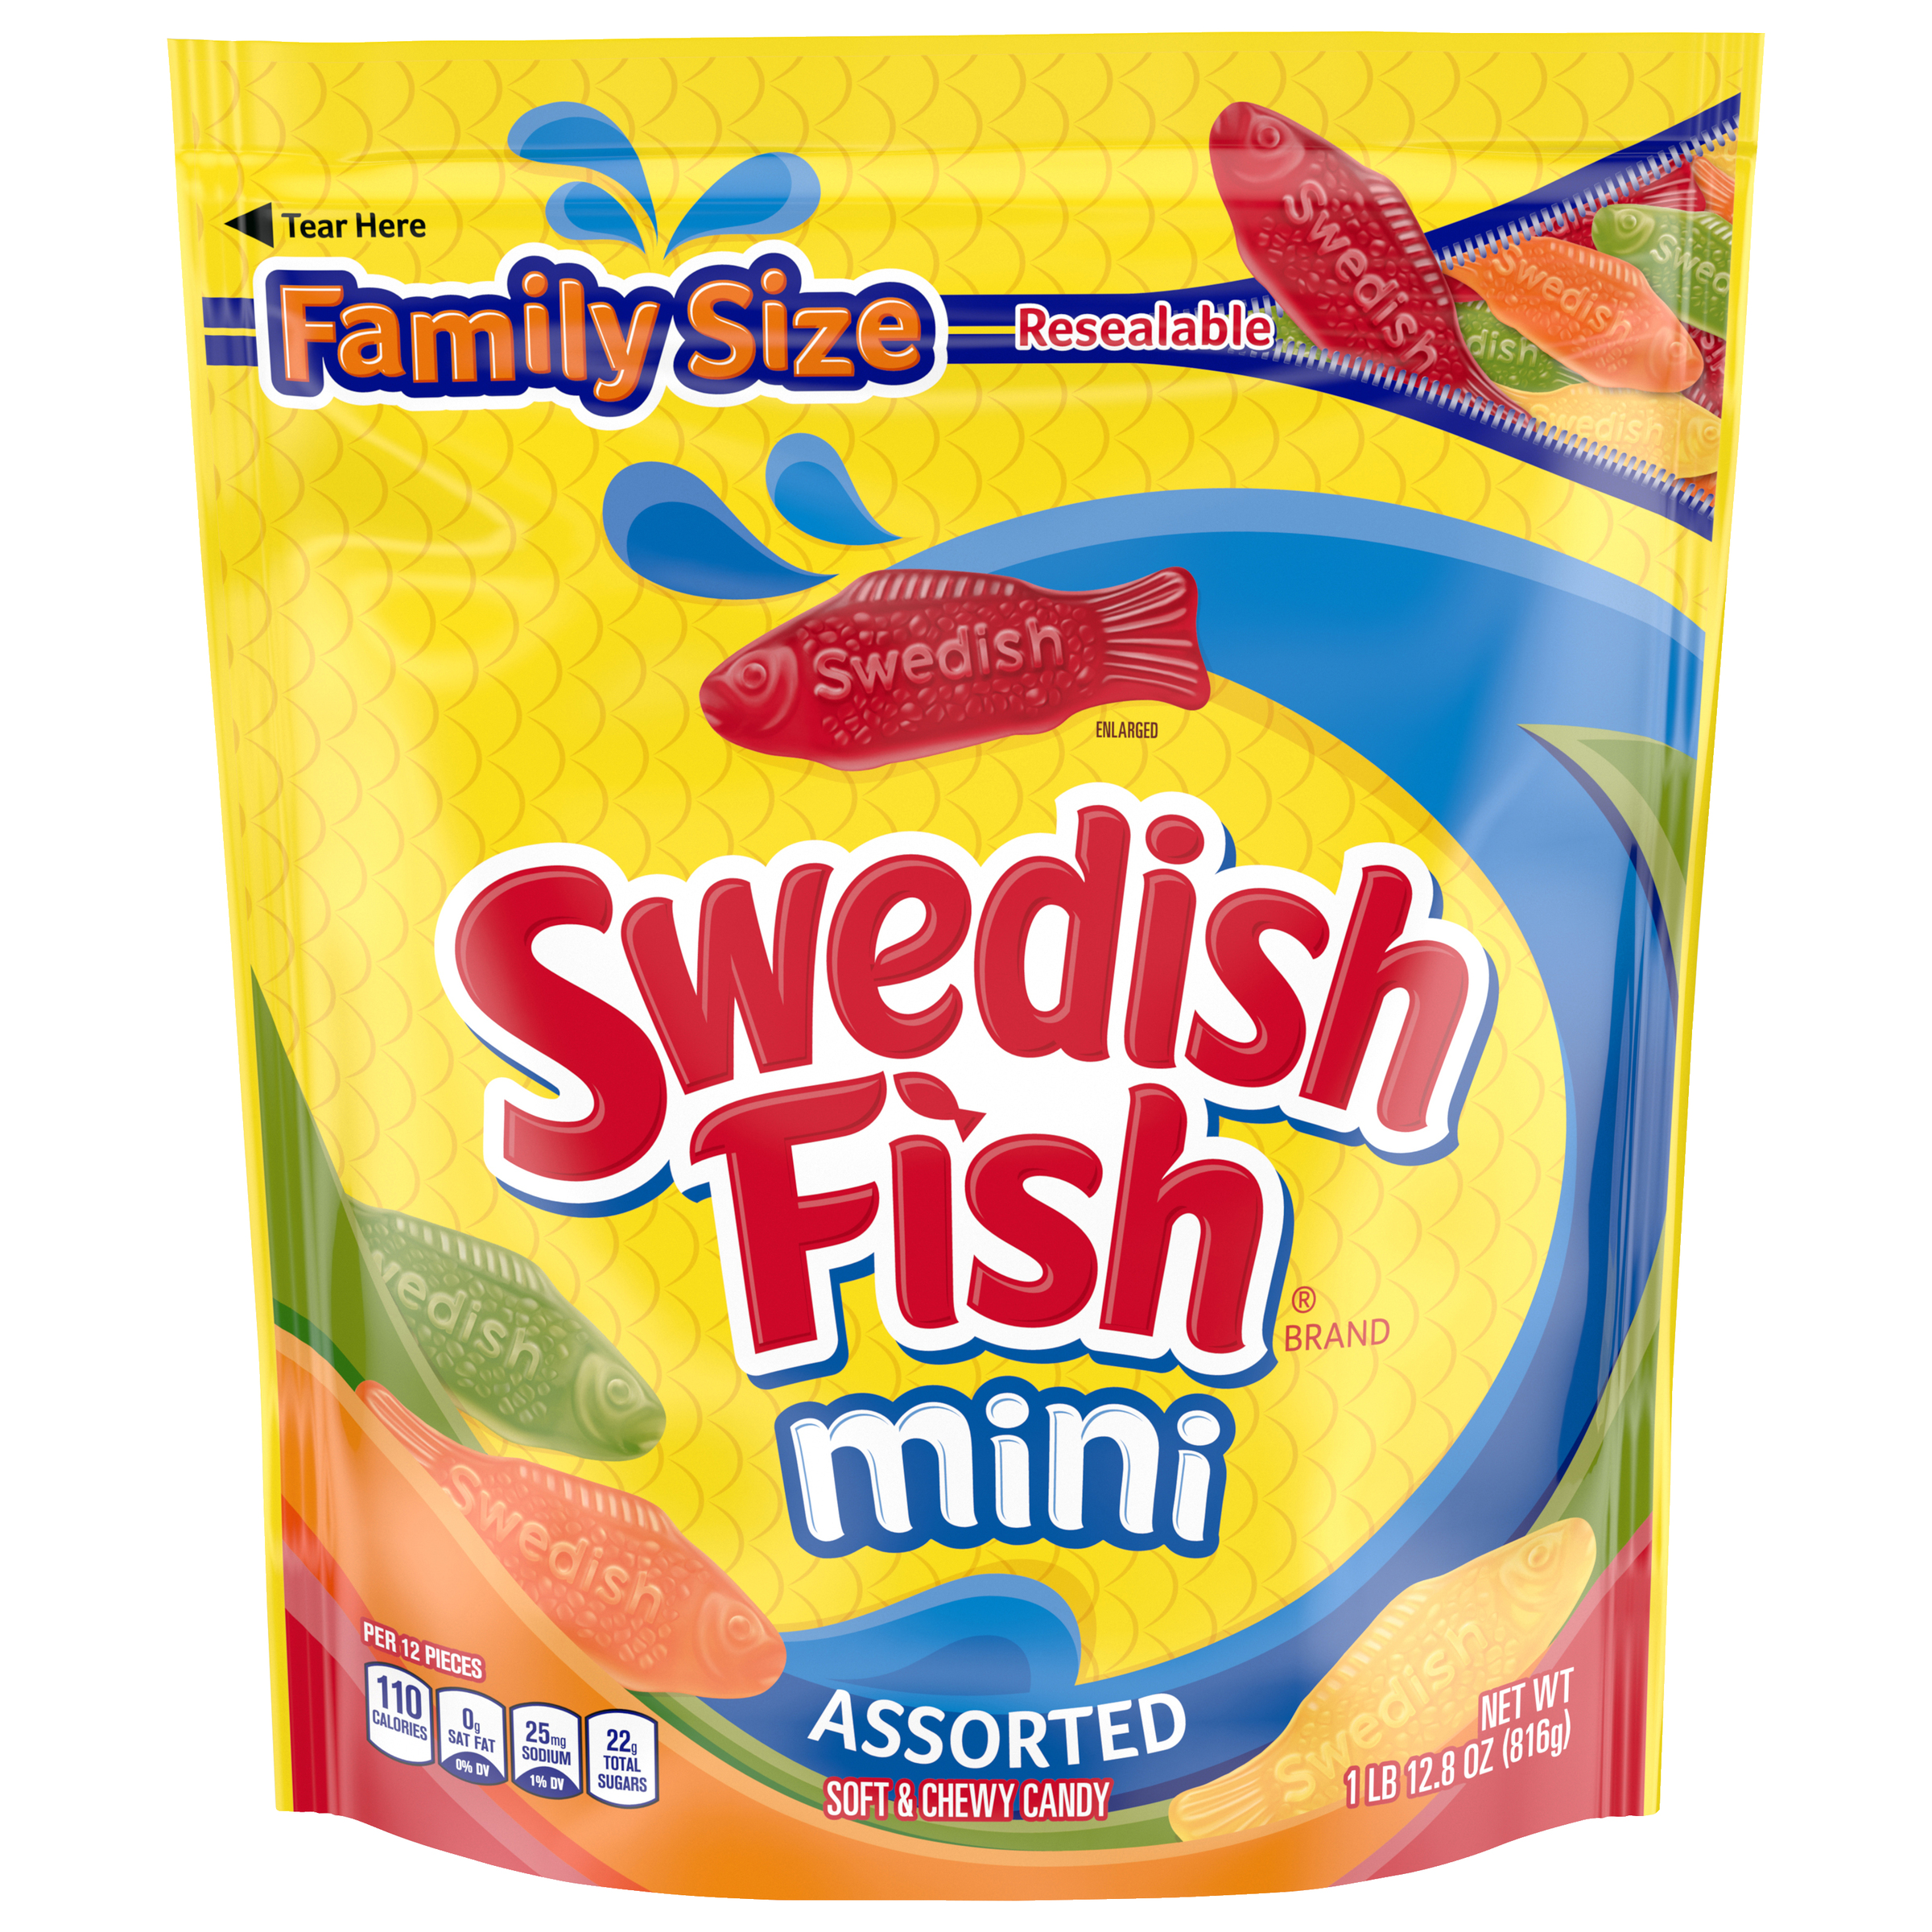 SWEDISH FISH Mini Assorted Soft & Chewy Candy, Family Size, 1.8 lb